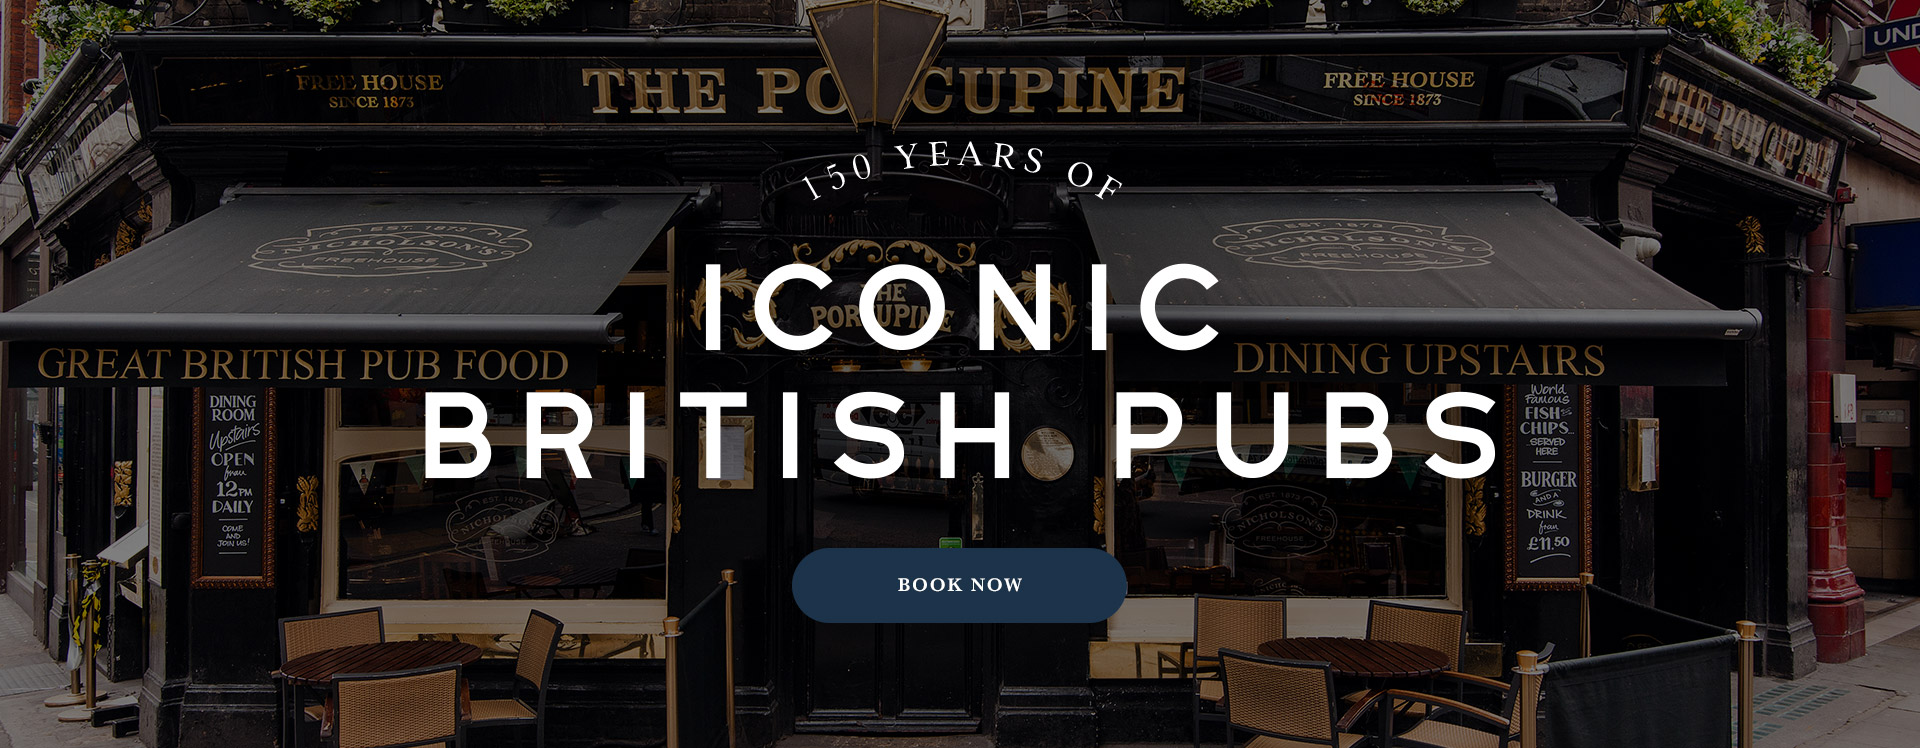 nic-2023-150years-theporcupineleicestersquarelondon-banner.jpg